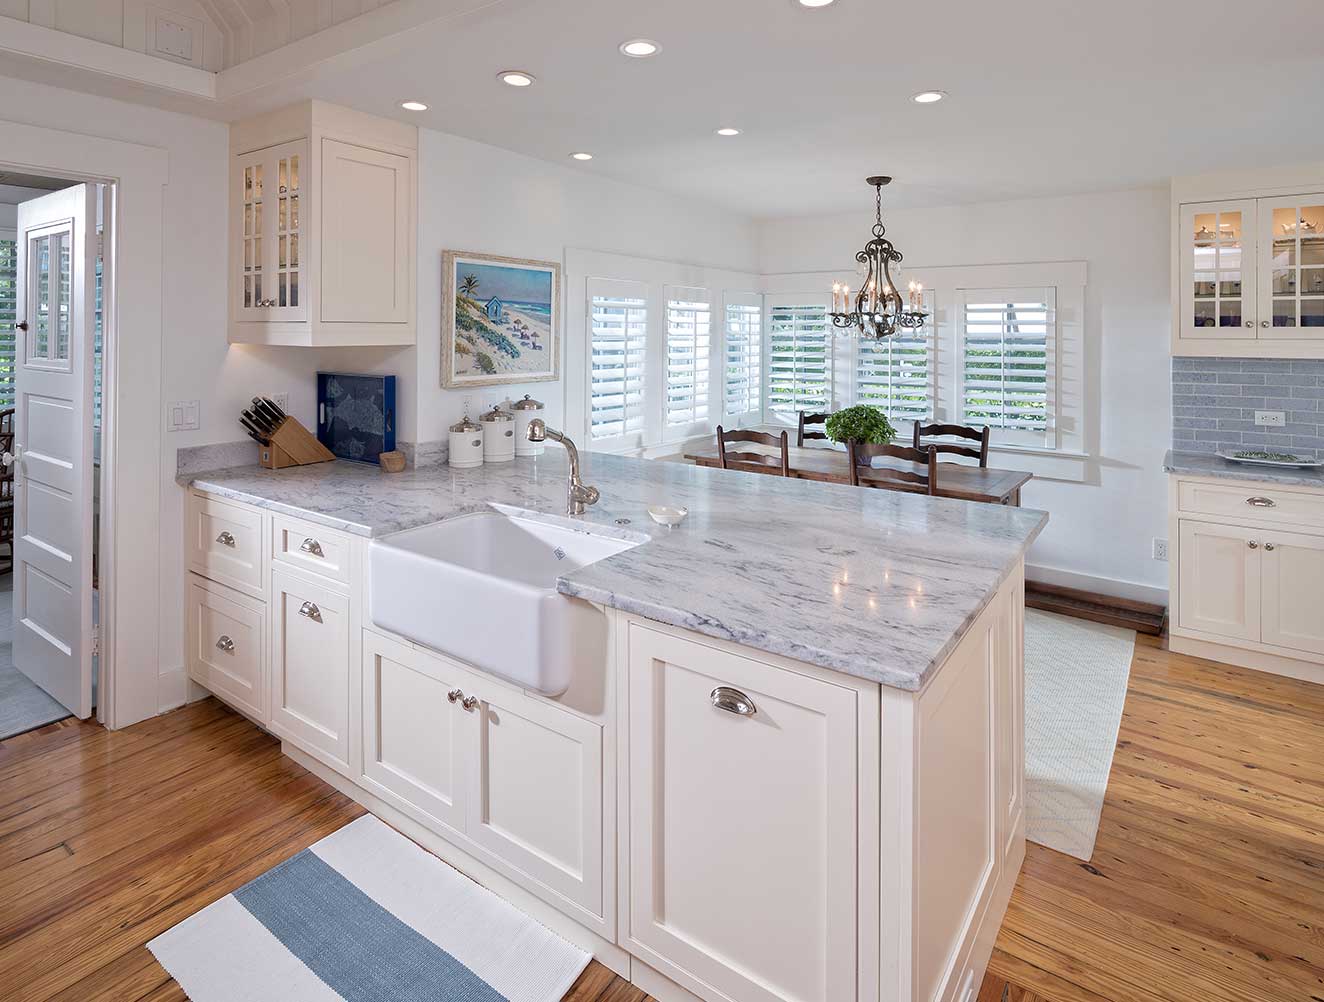 Coastal kitchen with breakfast nook and farmhouse style sink